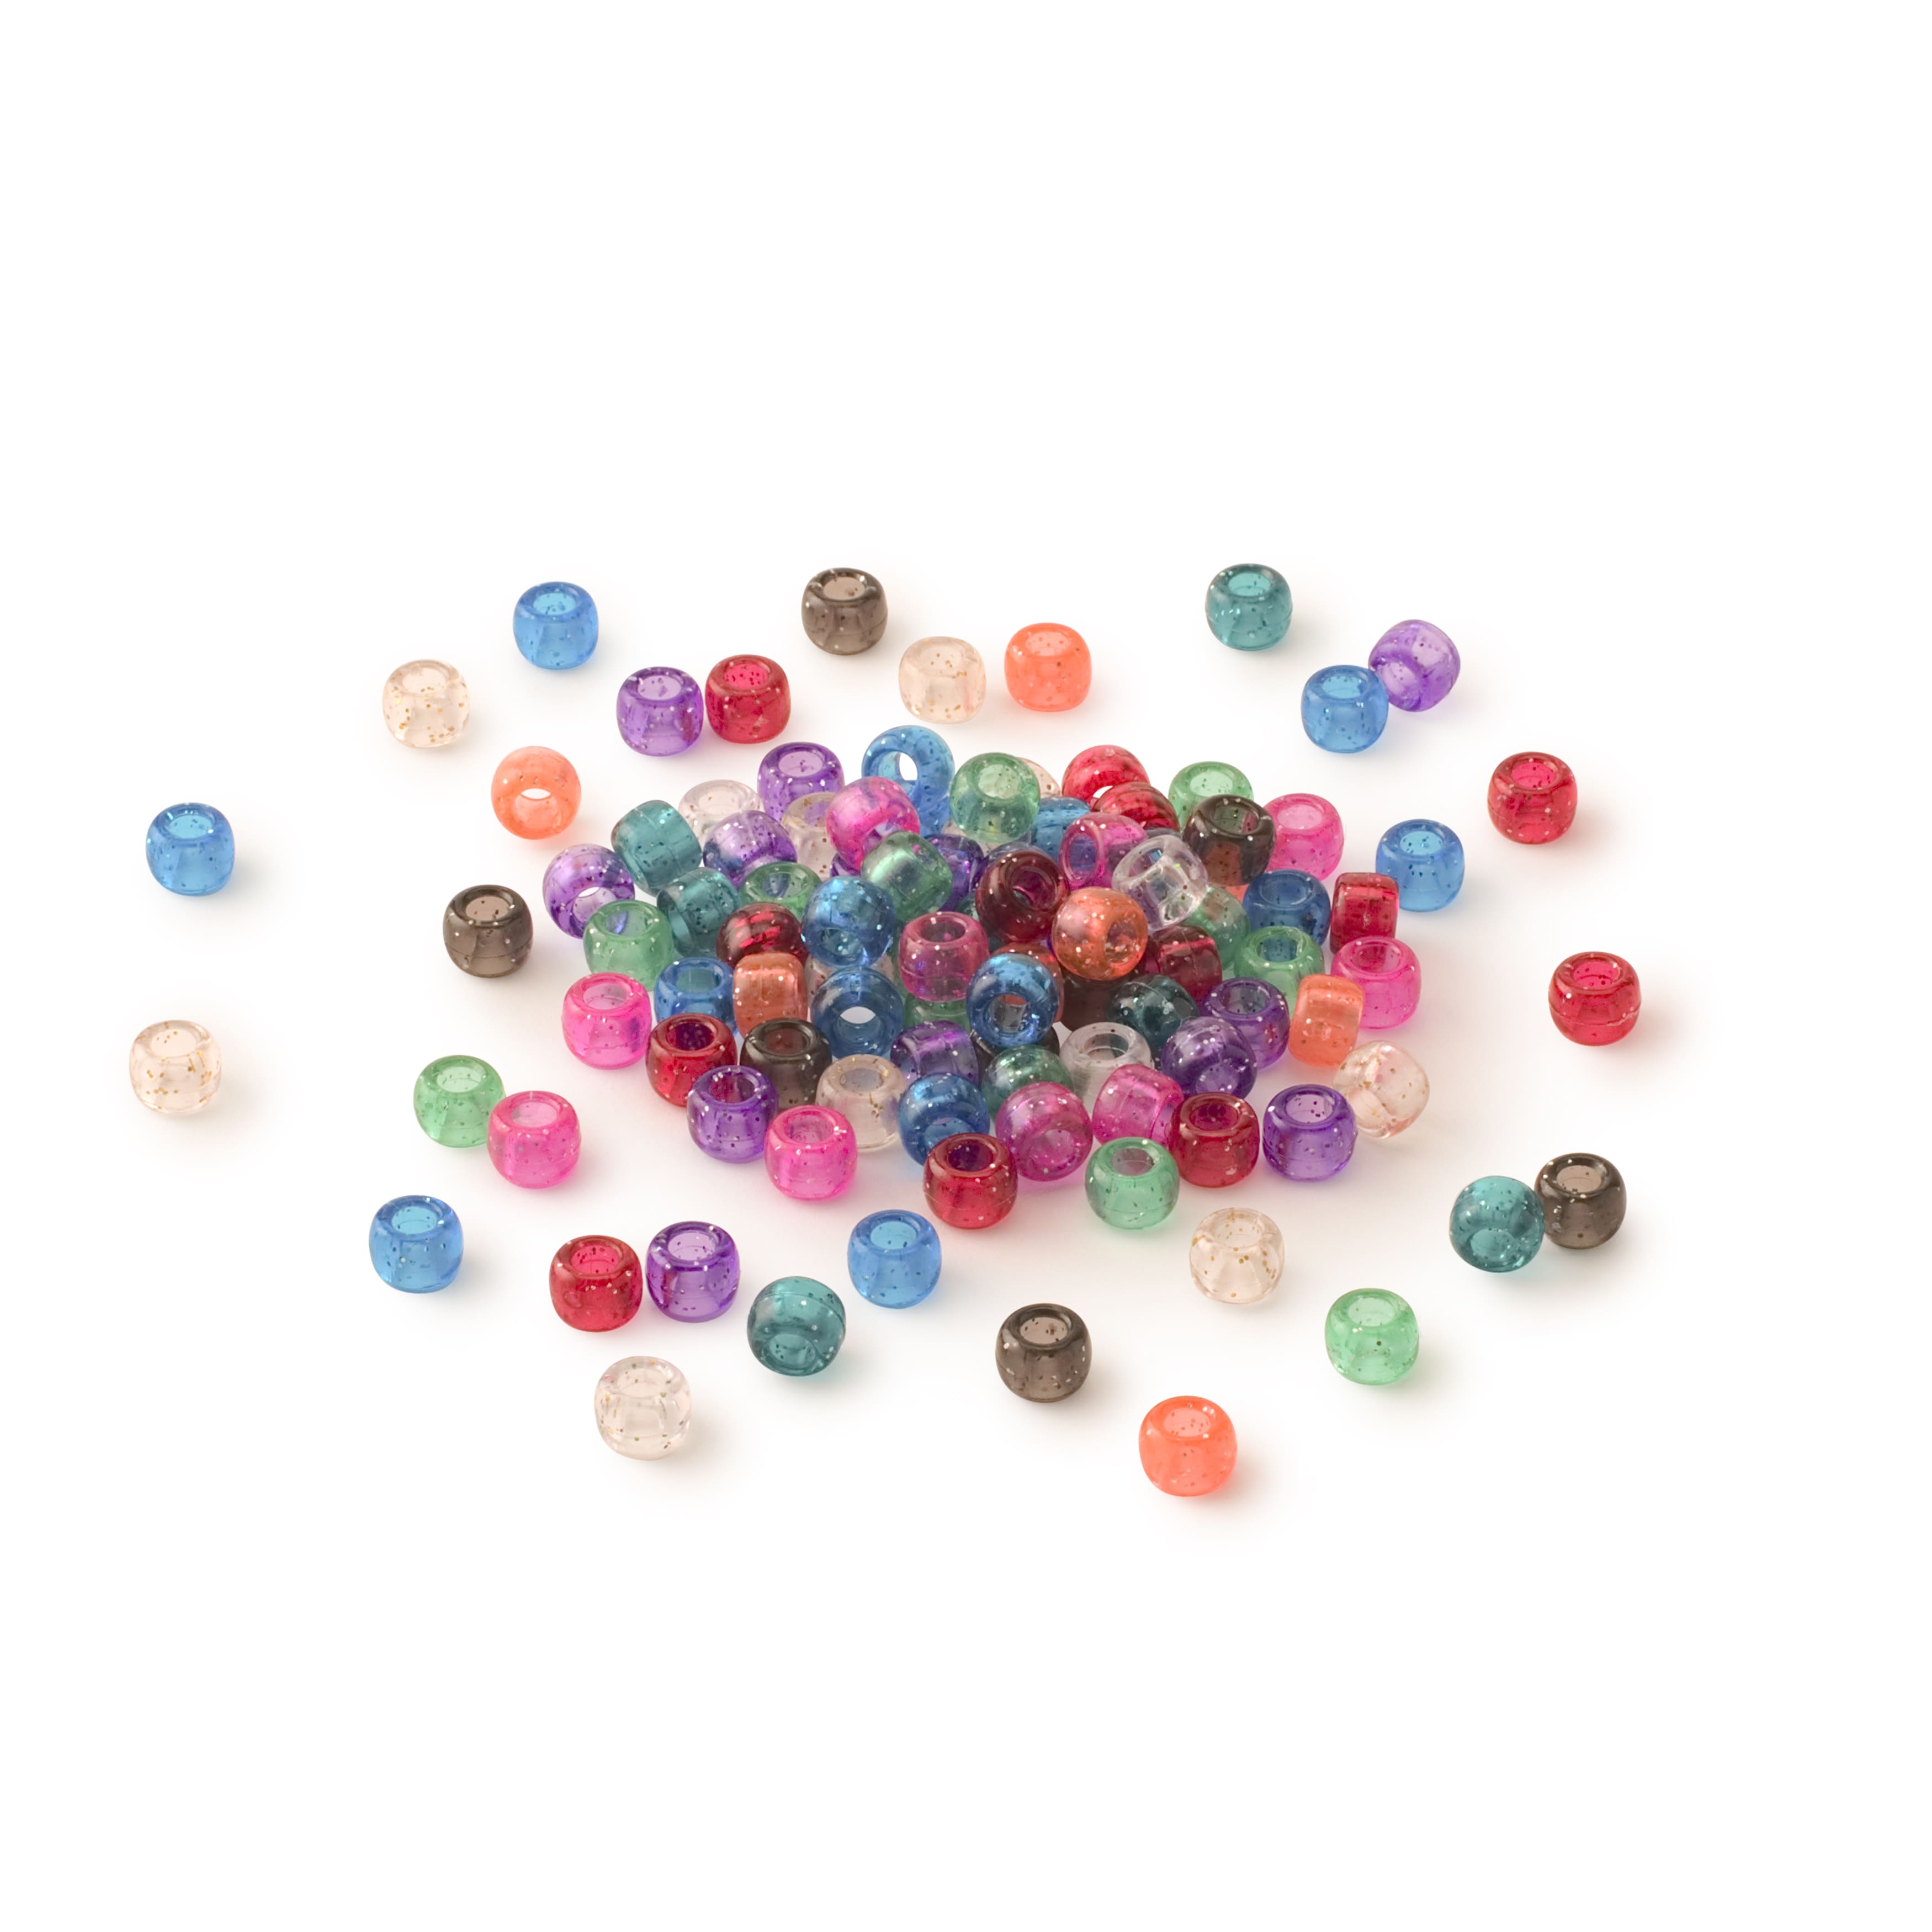 Creatology 8mm Color Change Clear Pony Beads - 280 ct